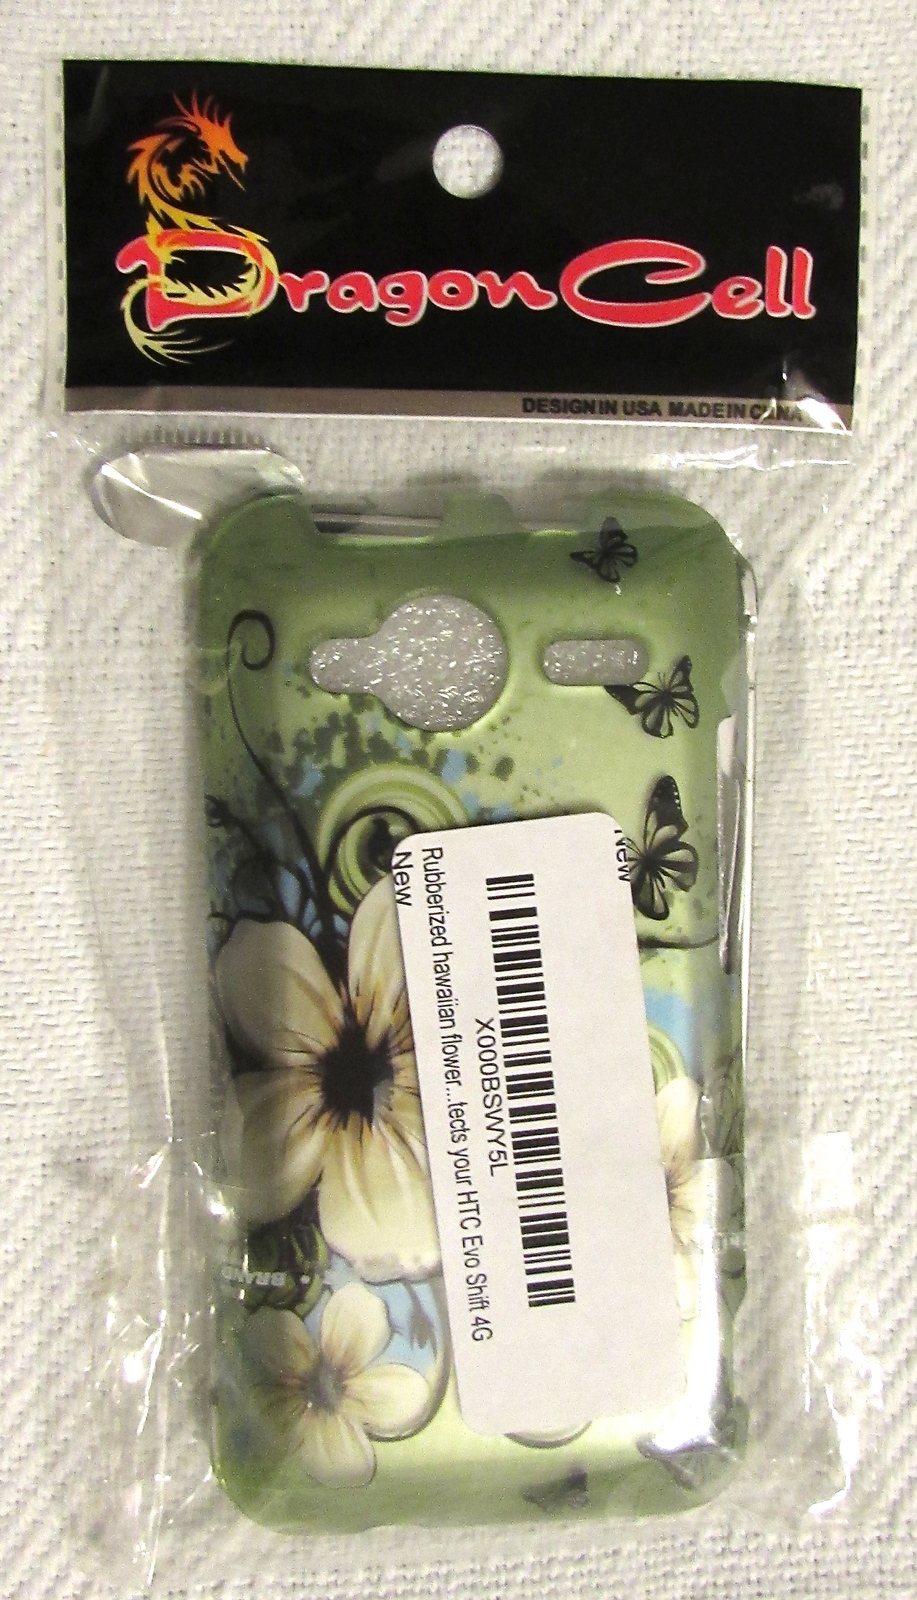 Hawaiian Flower Cell phone case for HTC EVO Shift 4G - New - $5.99